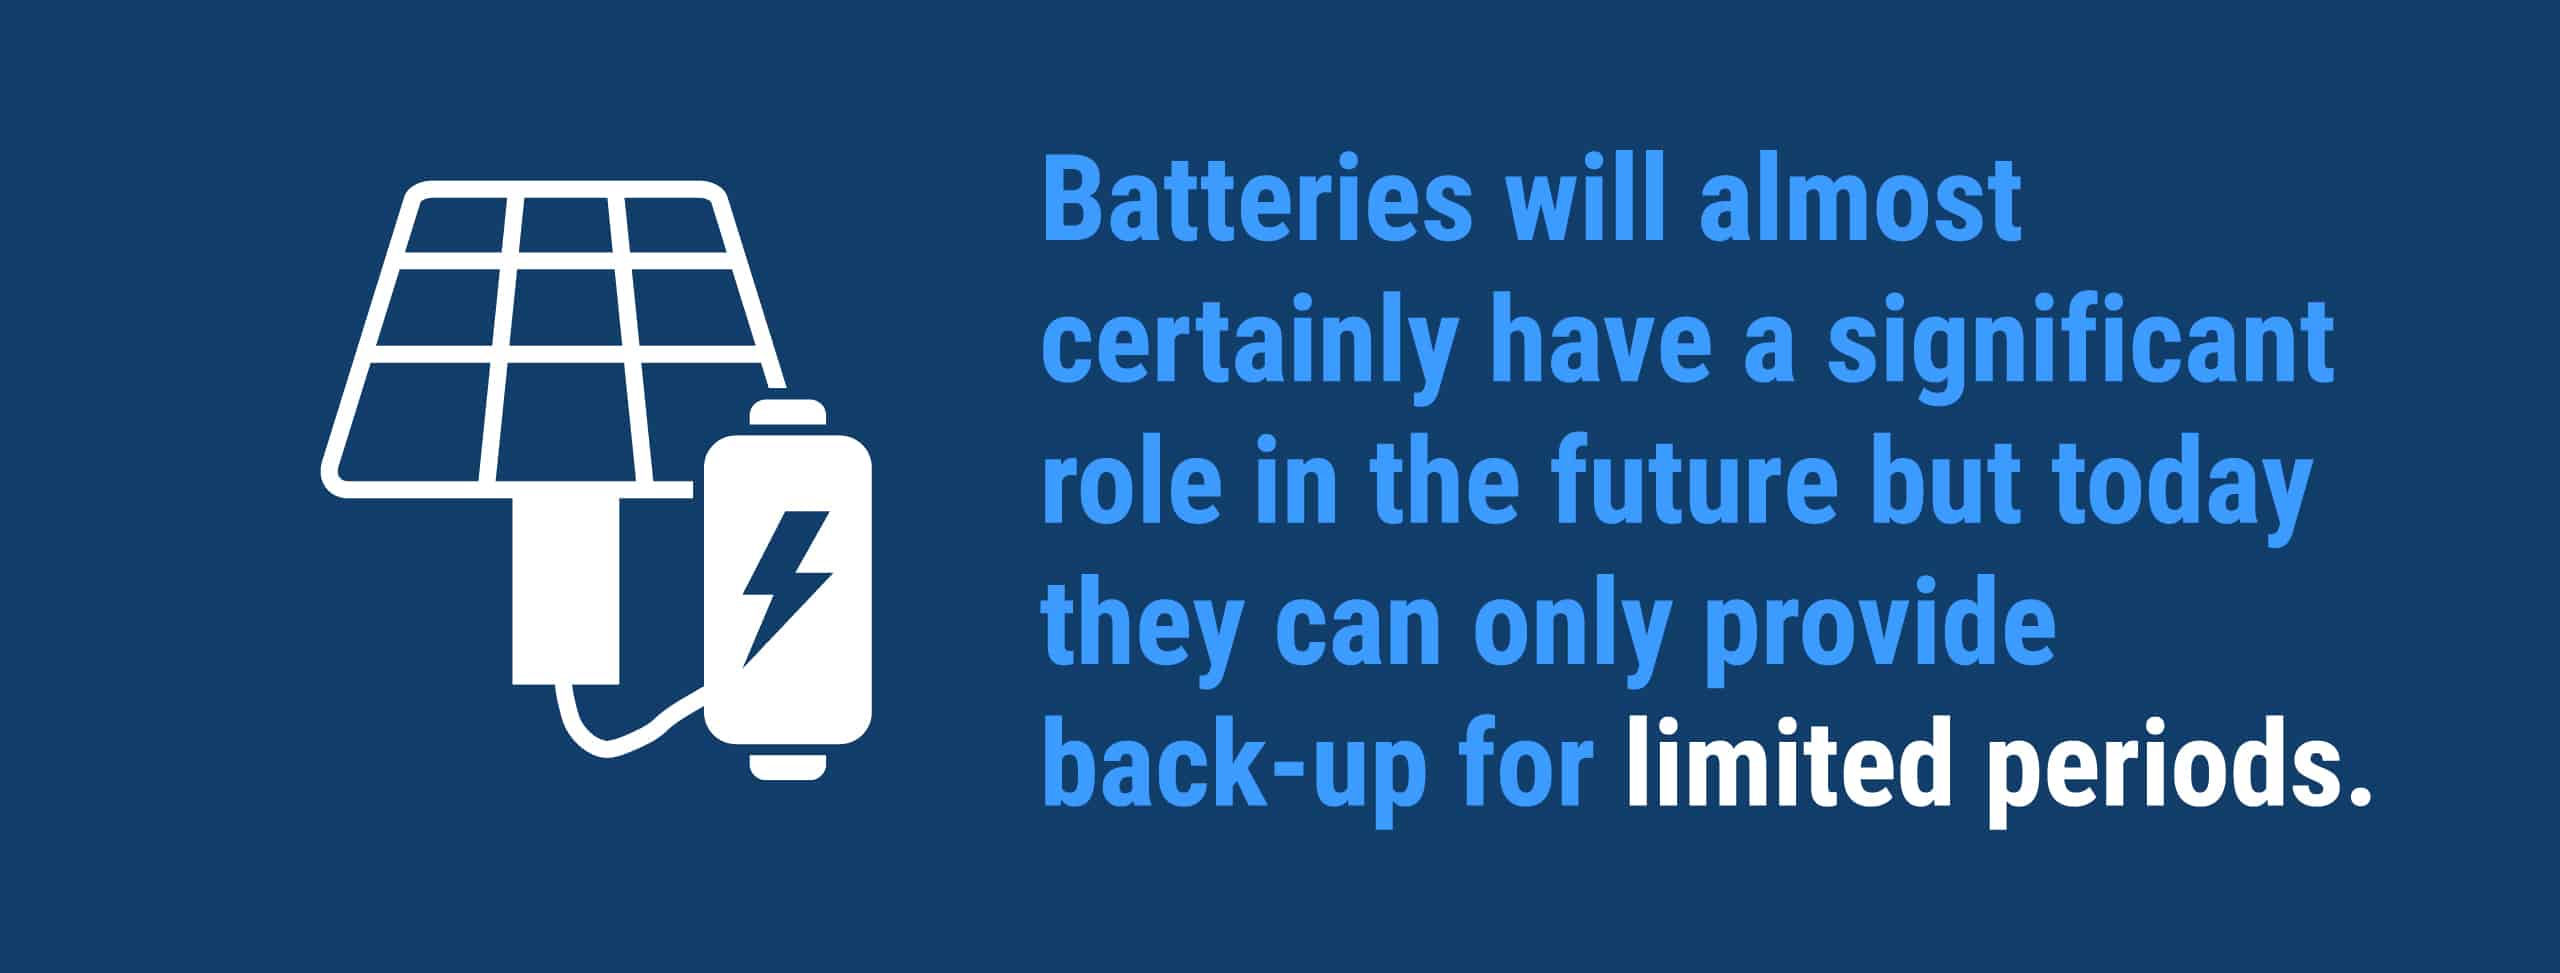 "Batteries will almost certainly have a significant role in the future but today they can only provide back-up for limited periods. 